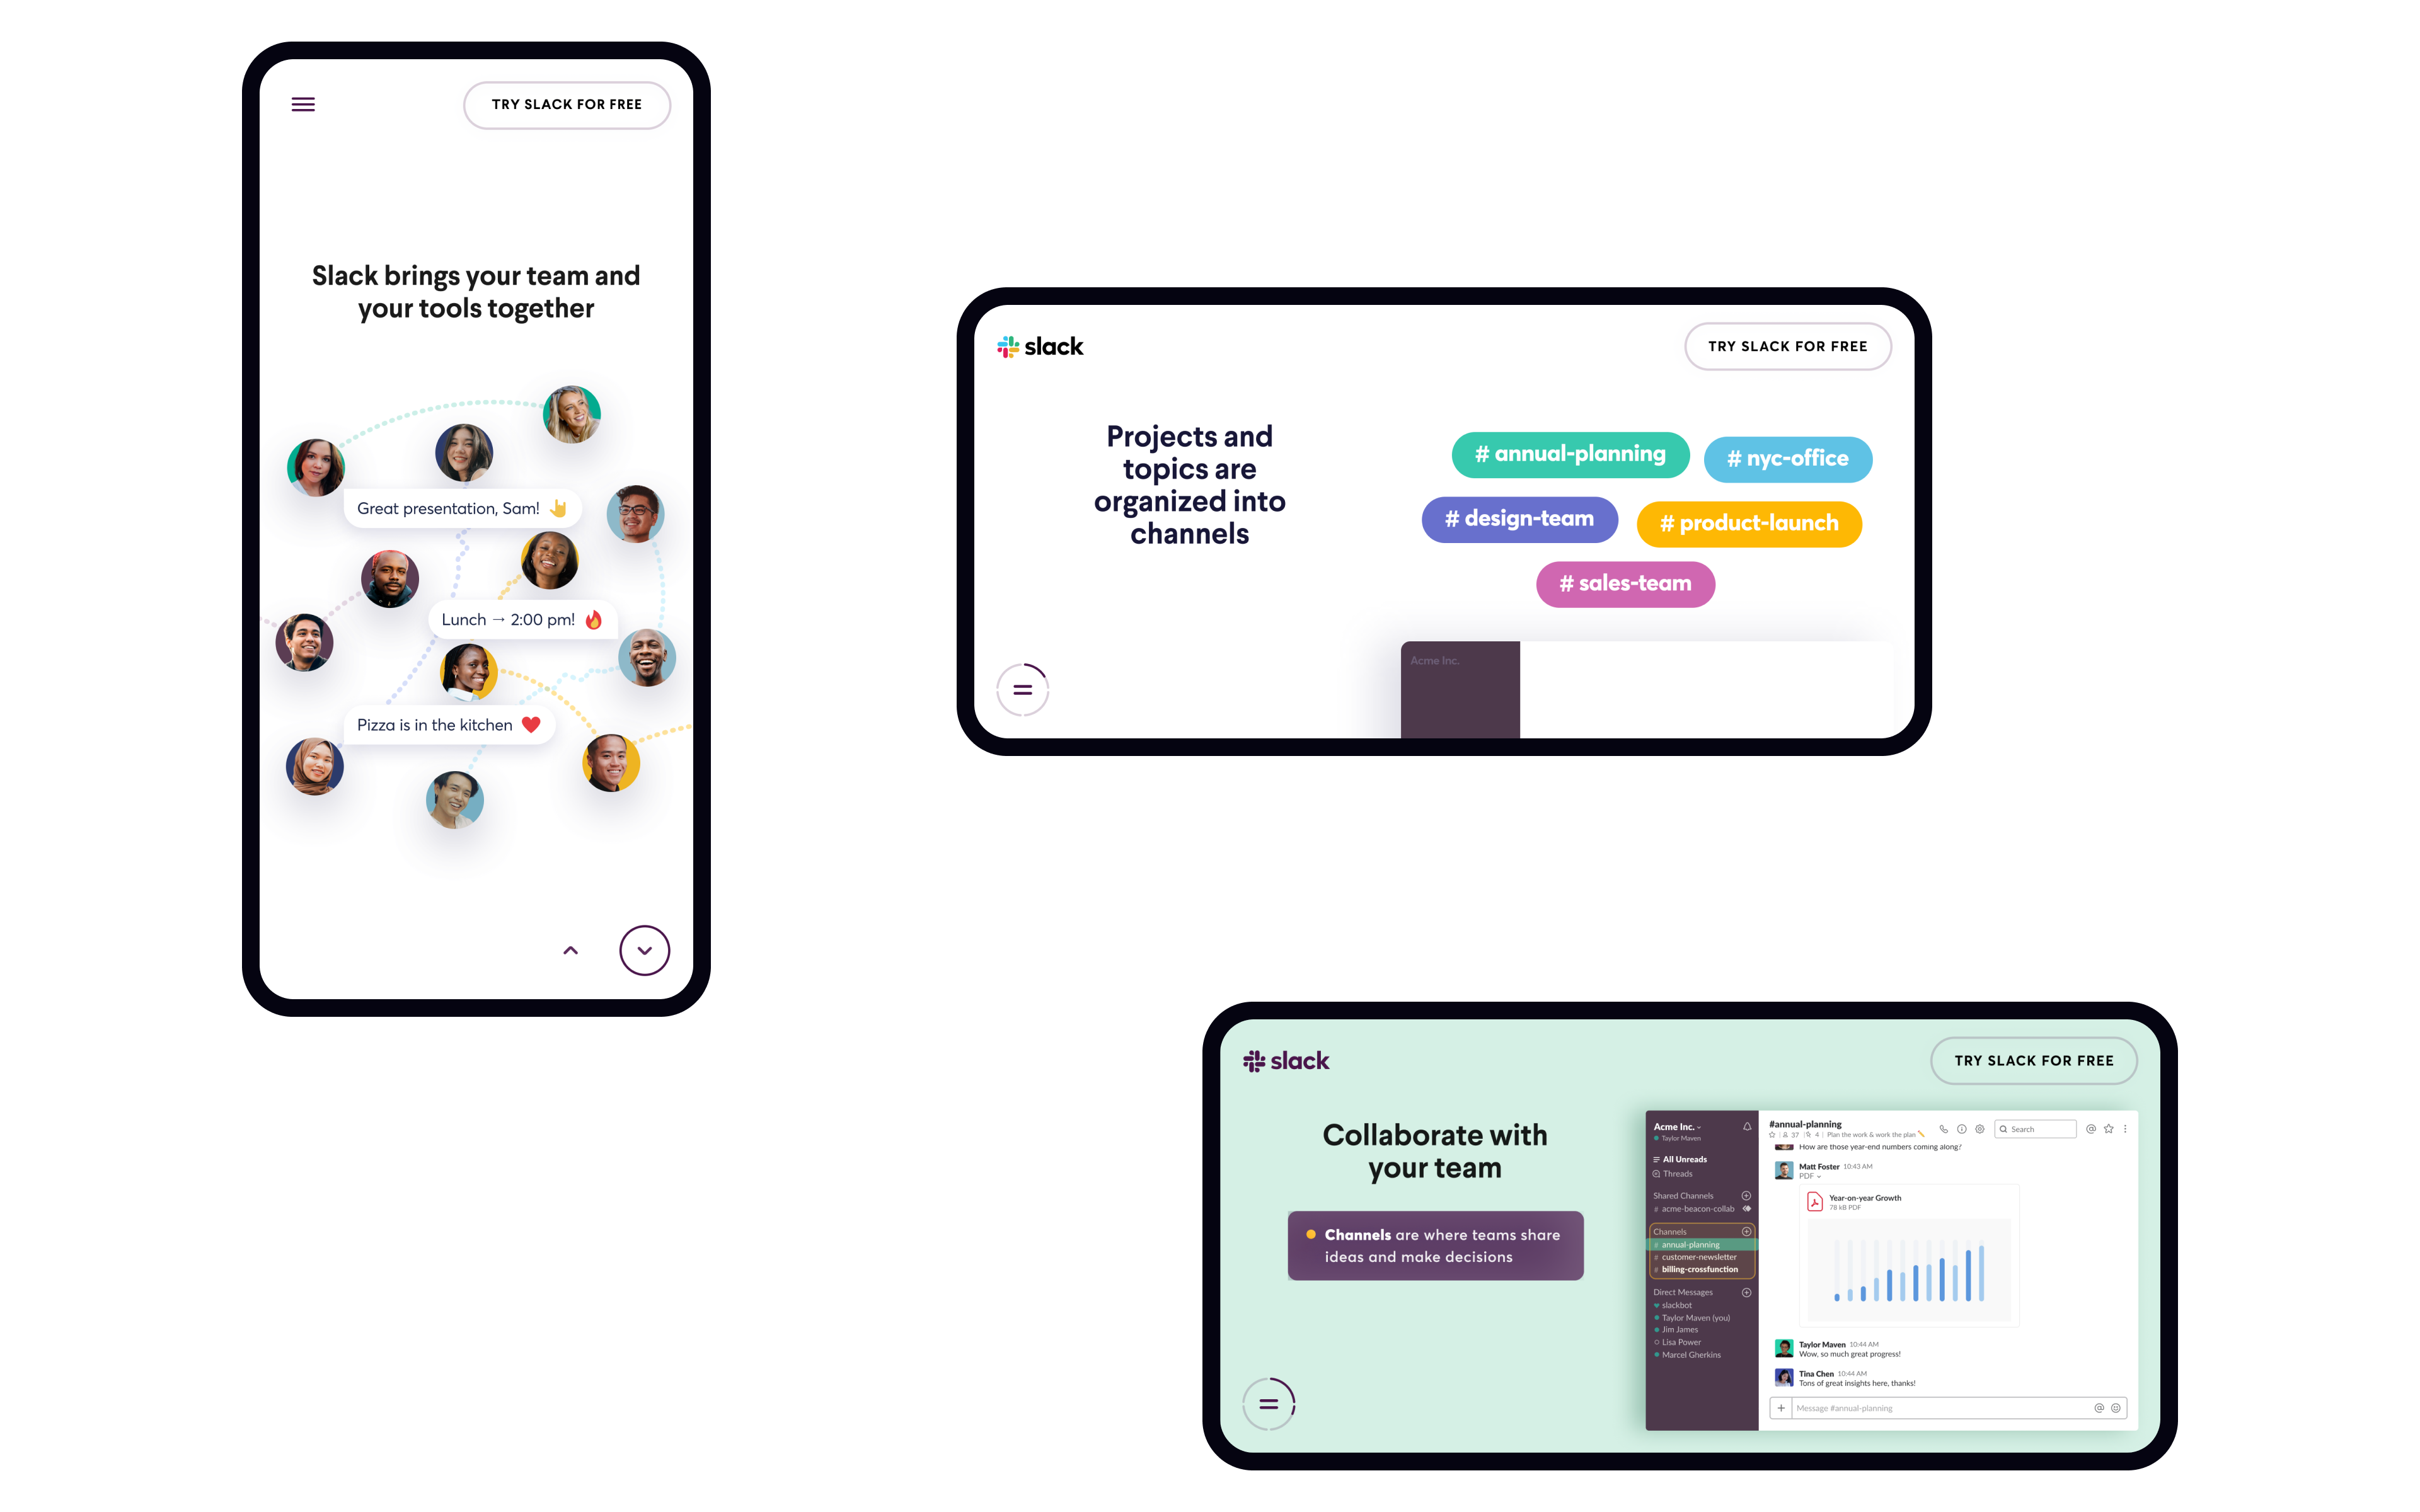 Slack website screenshots showing different welcome screens optimized for mobile